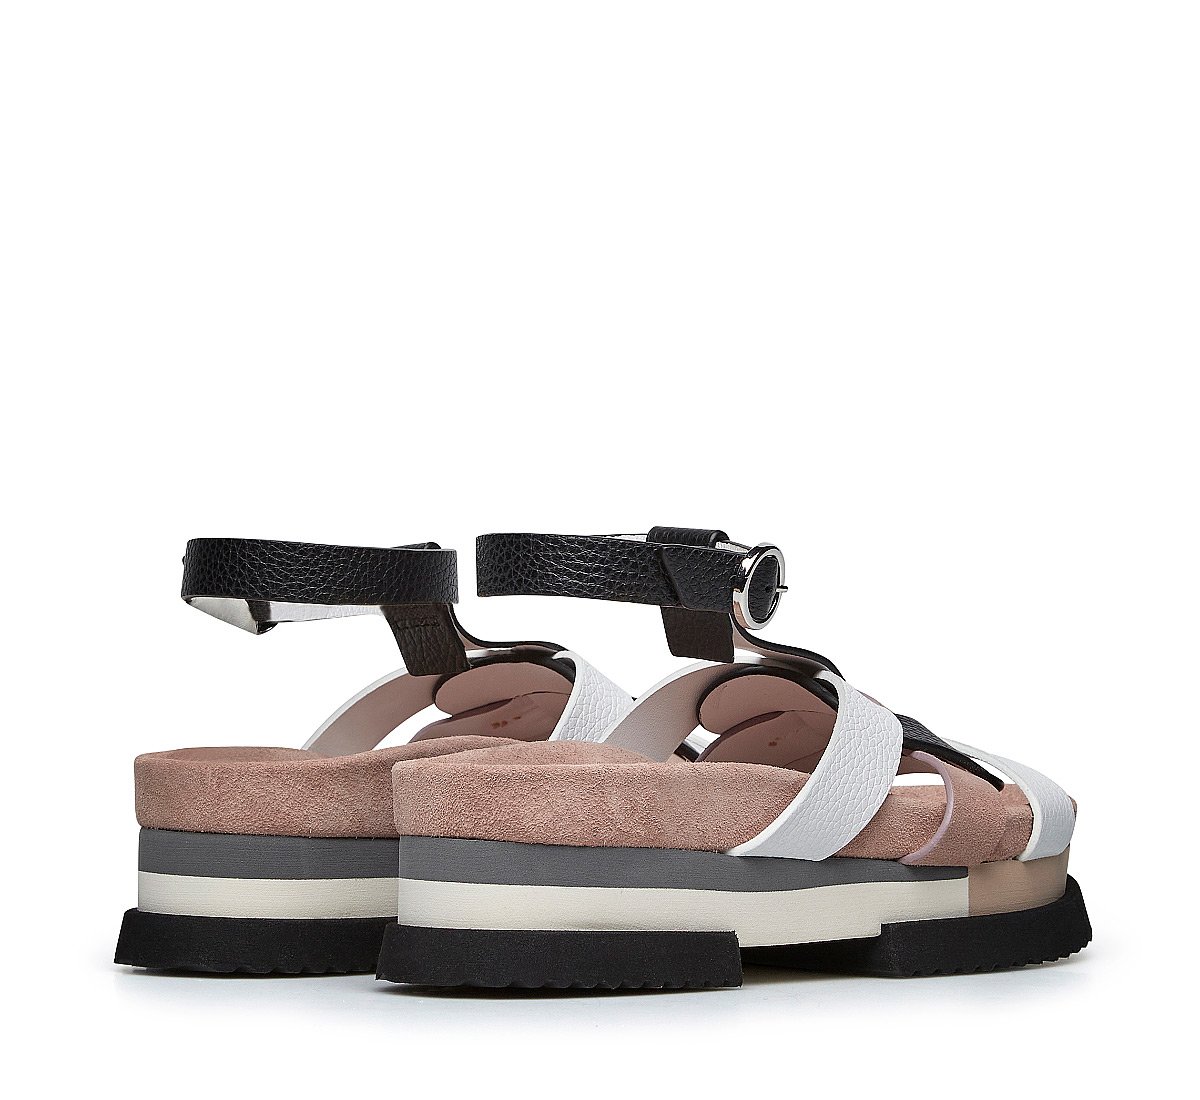 Sandal in suede and calfskin